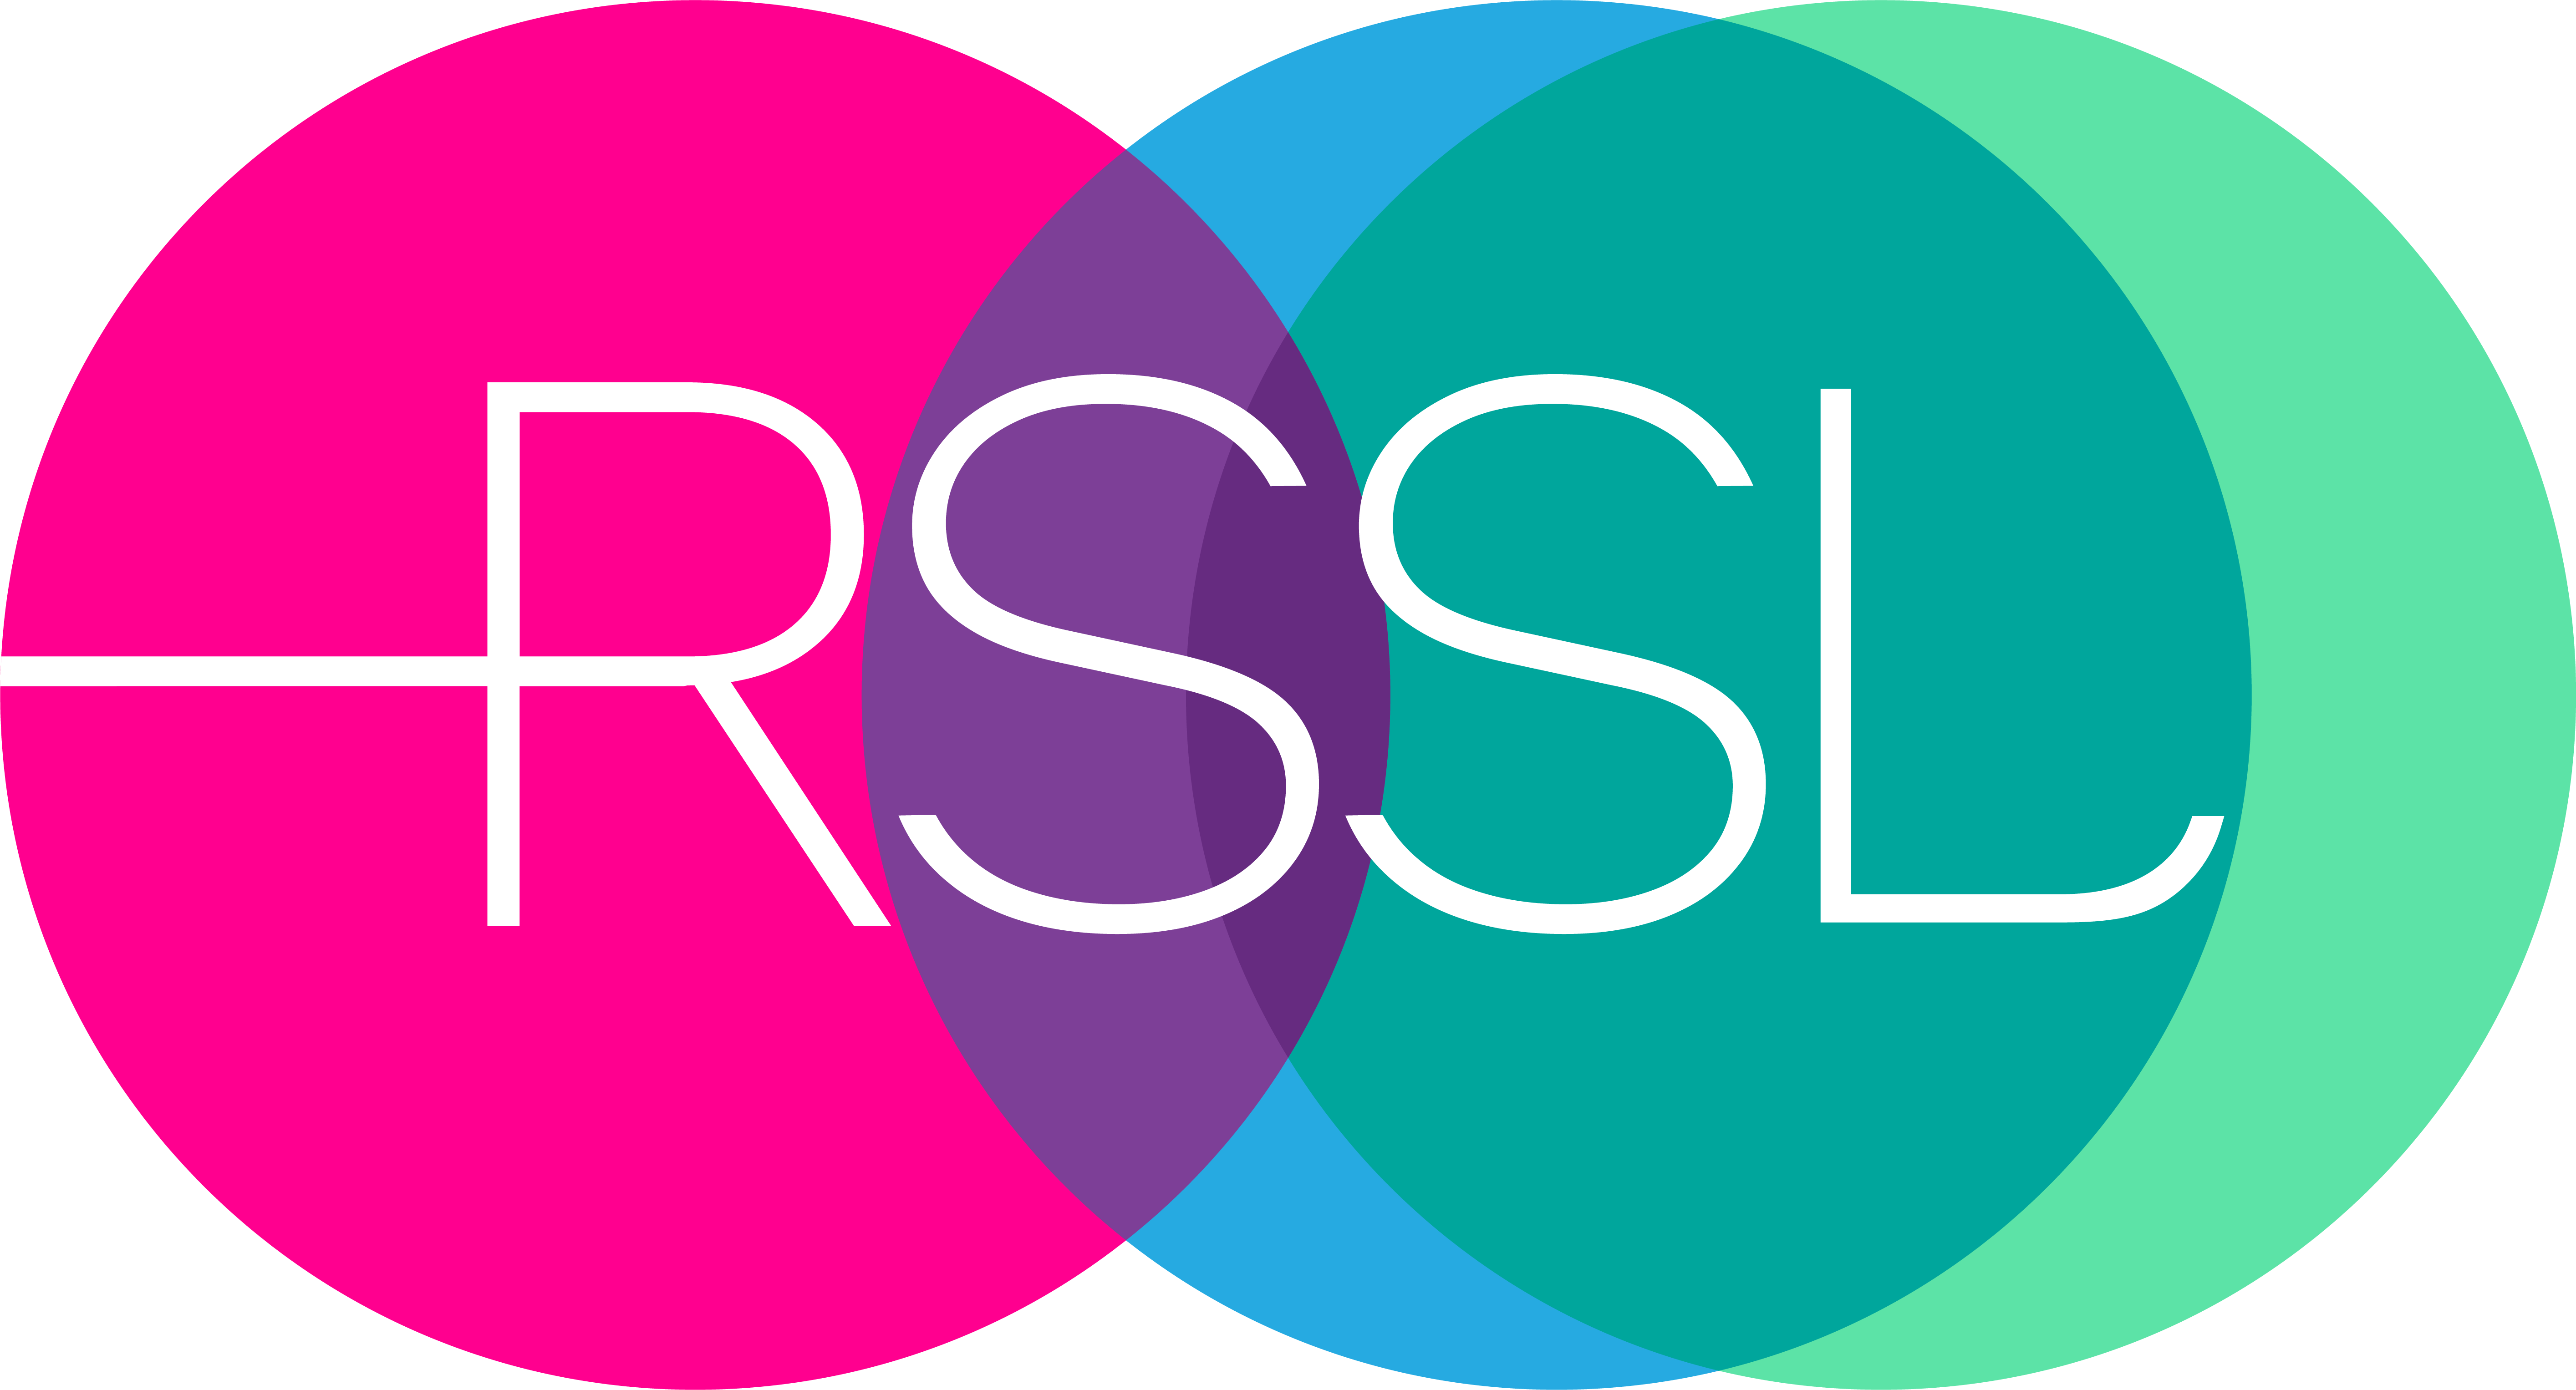 RSSL - RSSL are a cutting-edge food and pharmaceutical research company, pushing the boundaries of science 